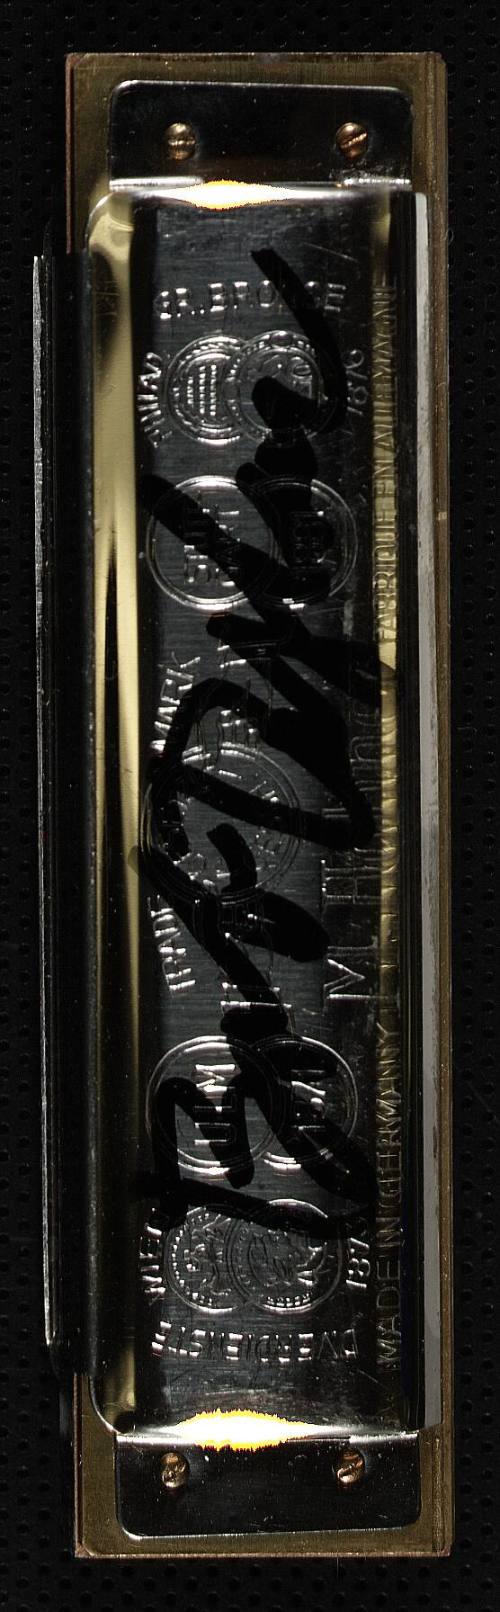 Hohner 1896 Marine Band B-Major Harmonica Autographed and Formerly Owned by Bob Dylan